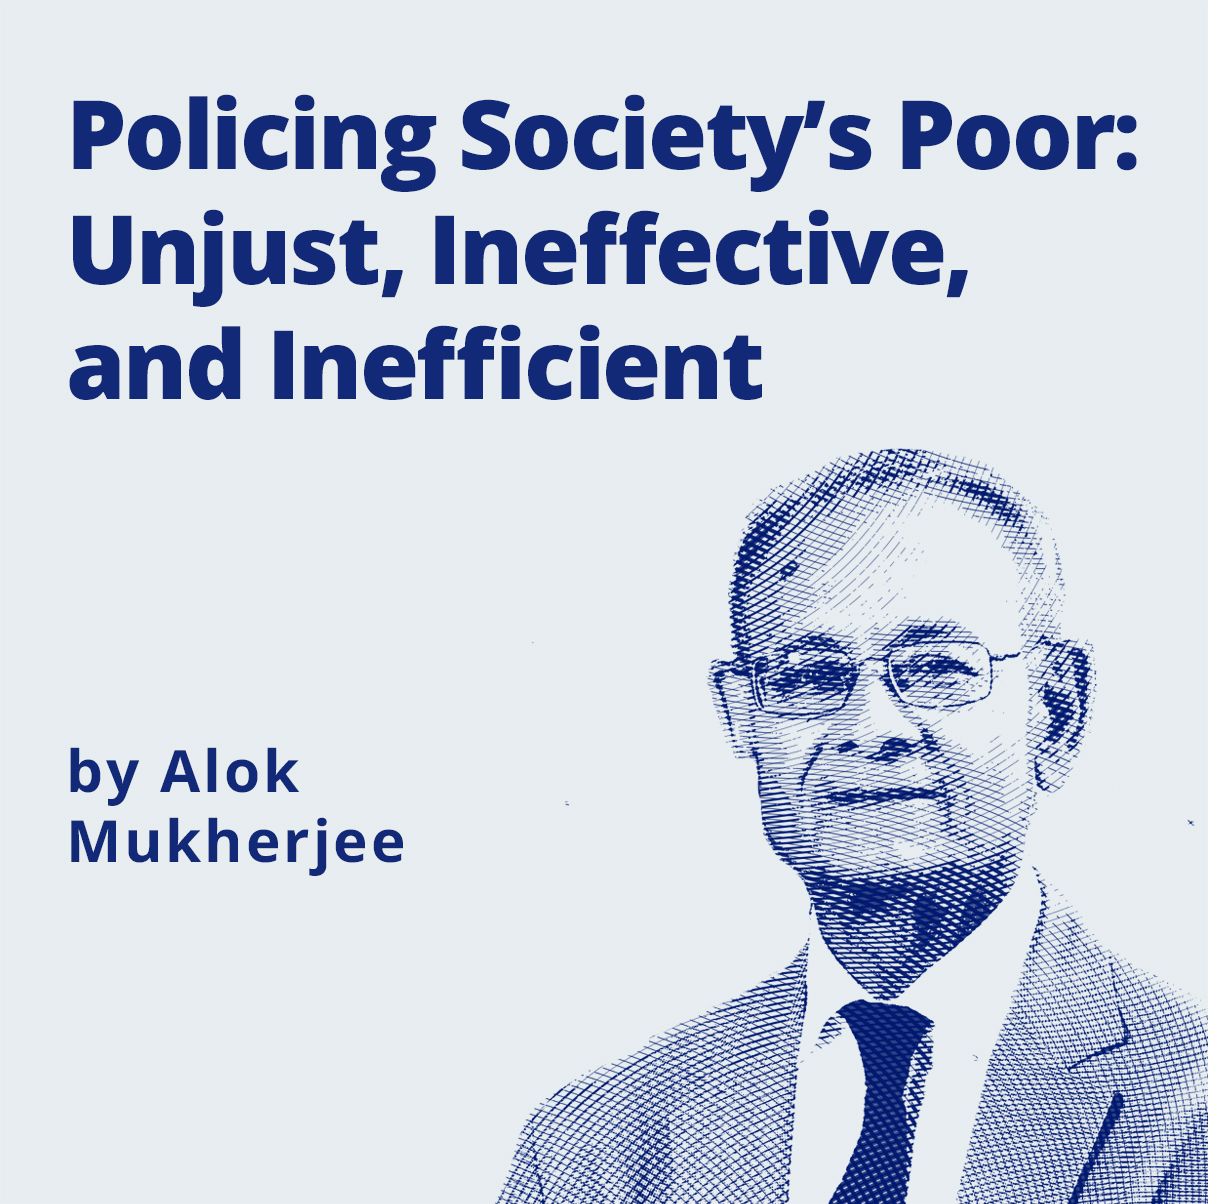 Image -  Policing Society's Poor: Unjust, Ineffective, and Inefficient by Alok Mukherjee